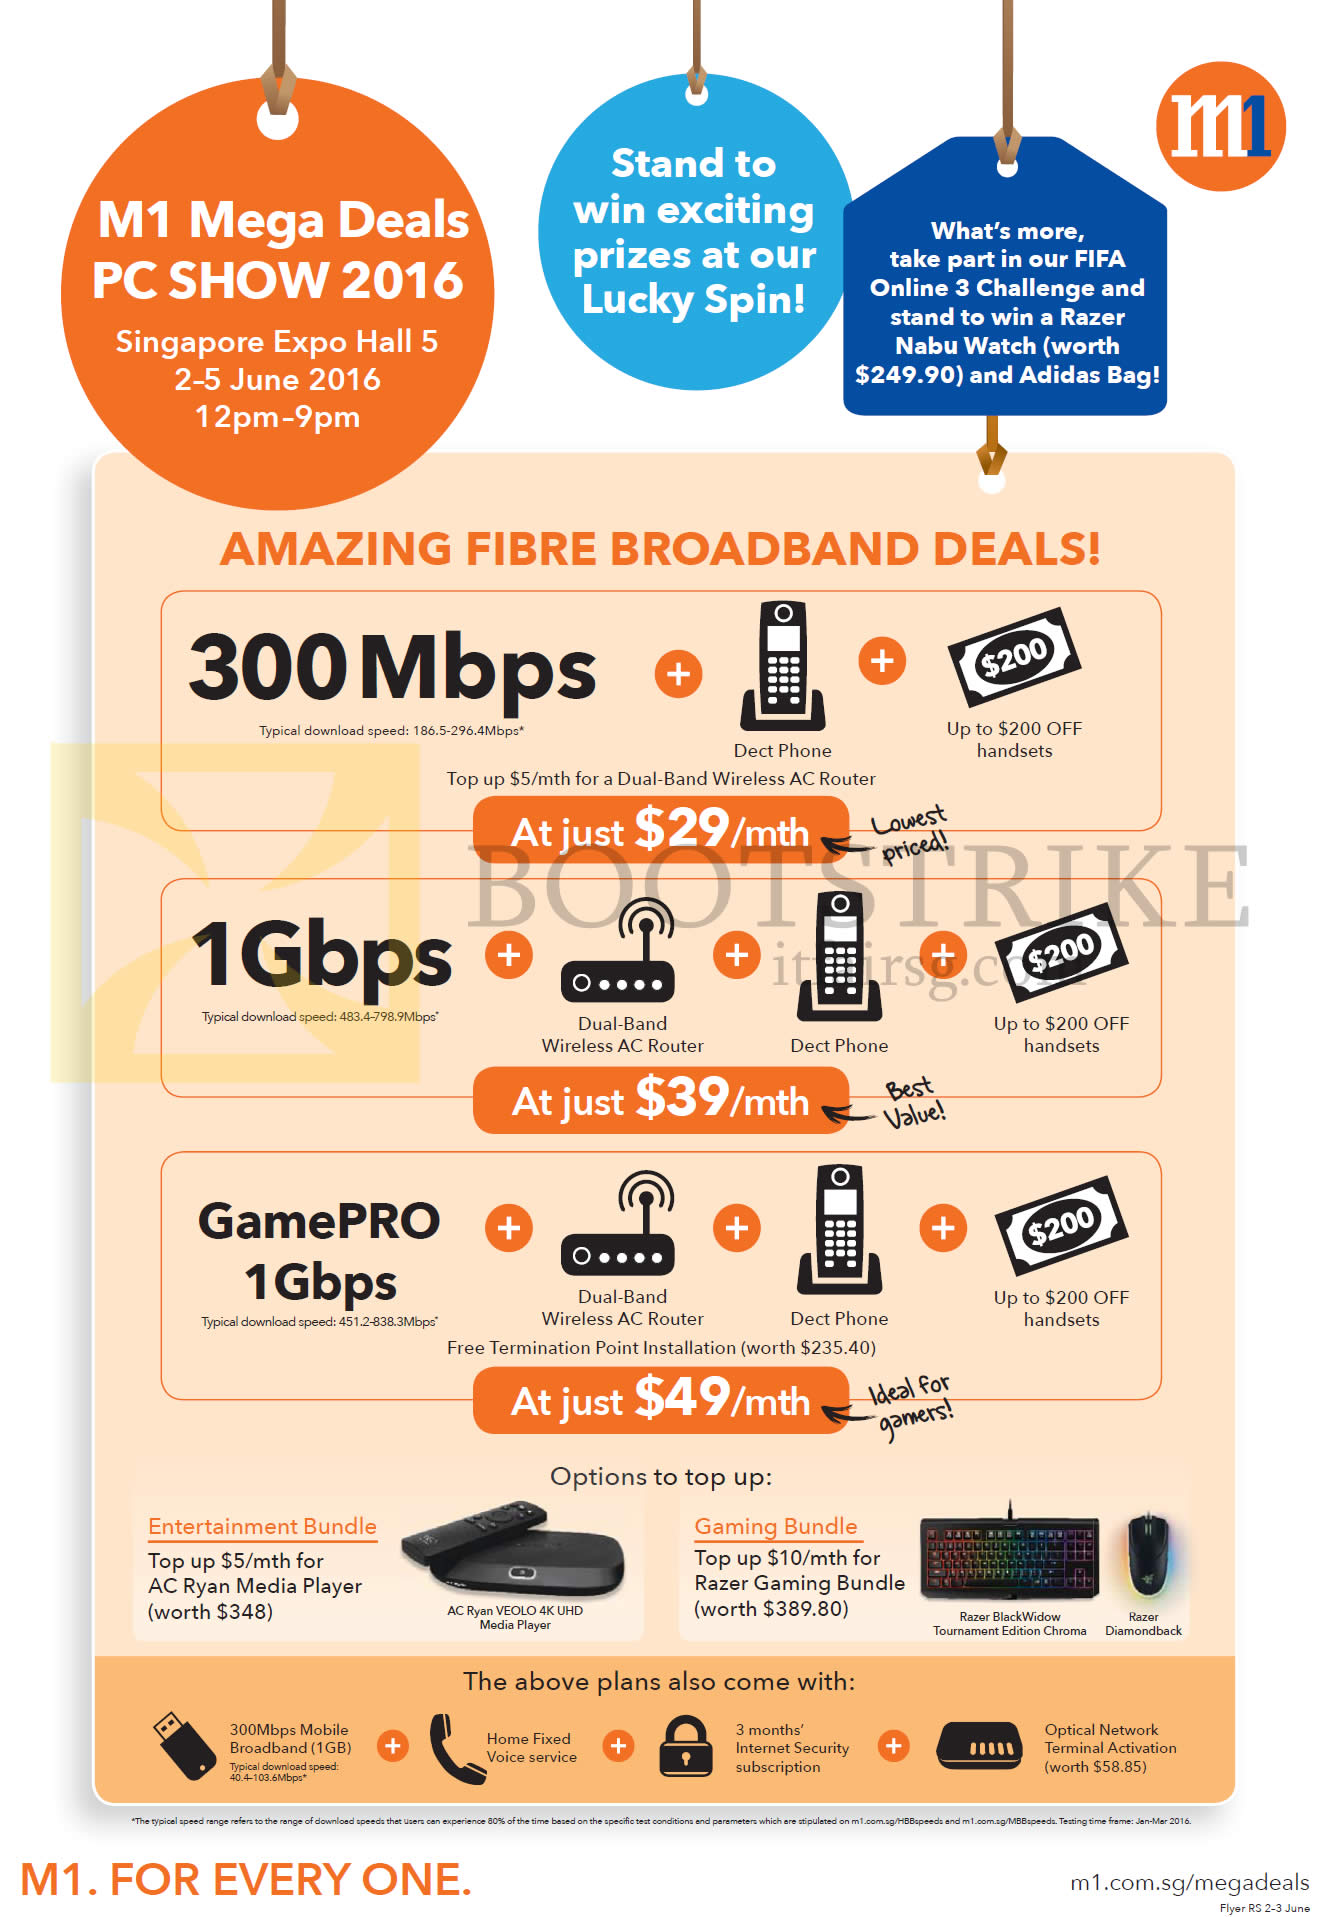 PC SHOW 2016 price list image brochure of M1 Fibre Broadband 29.00 300Mbps, 39.00 1Gbps, 49.00 GamePRO 1Gbps, Entertainment Bundle, Gaming Bundle